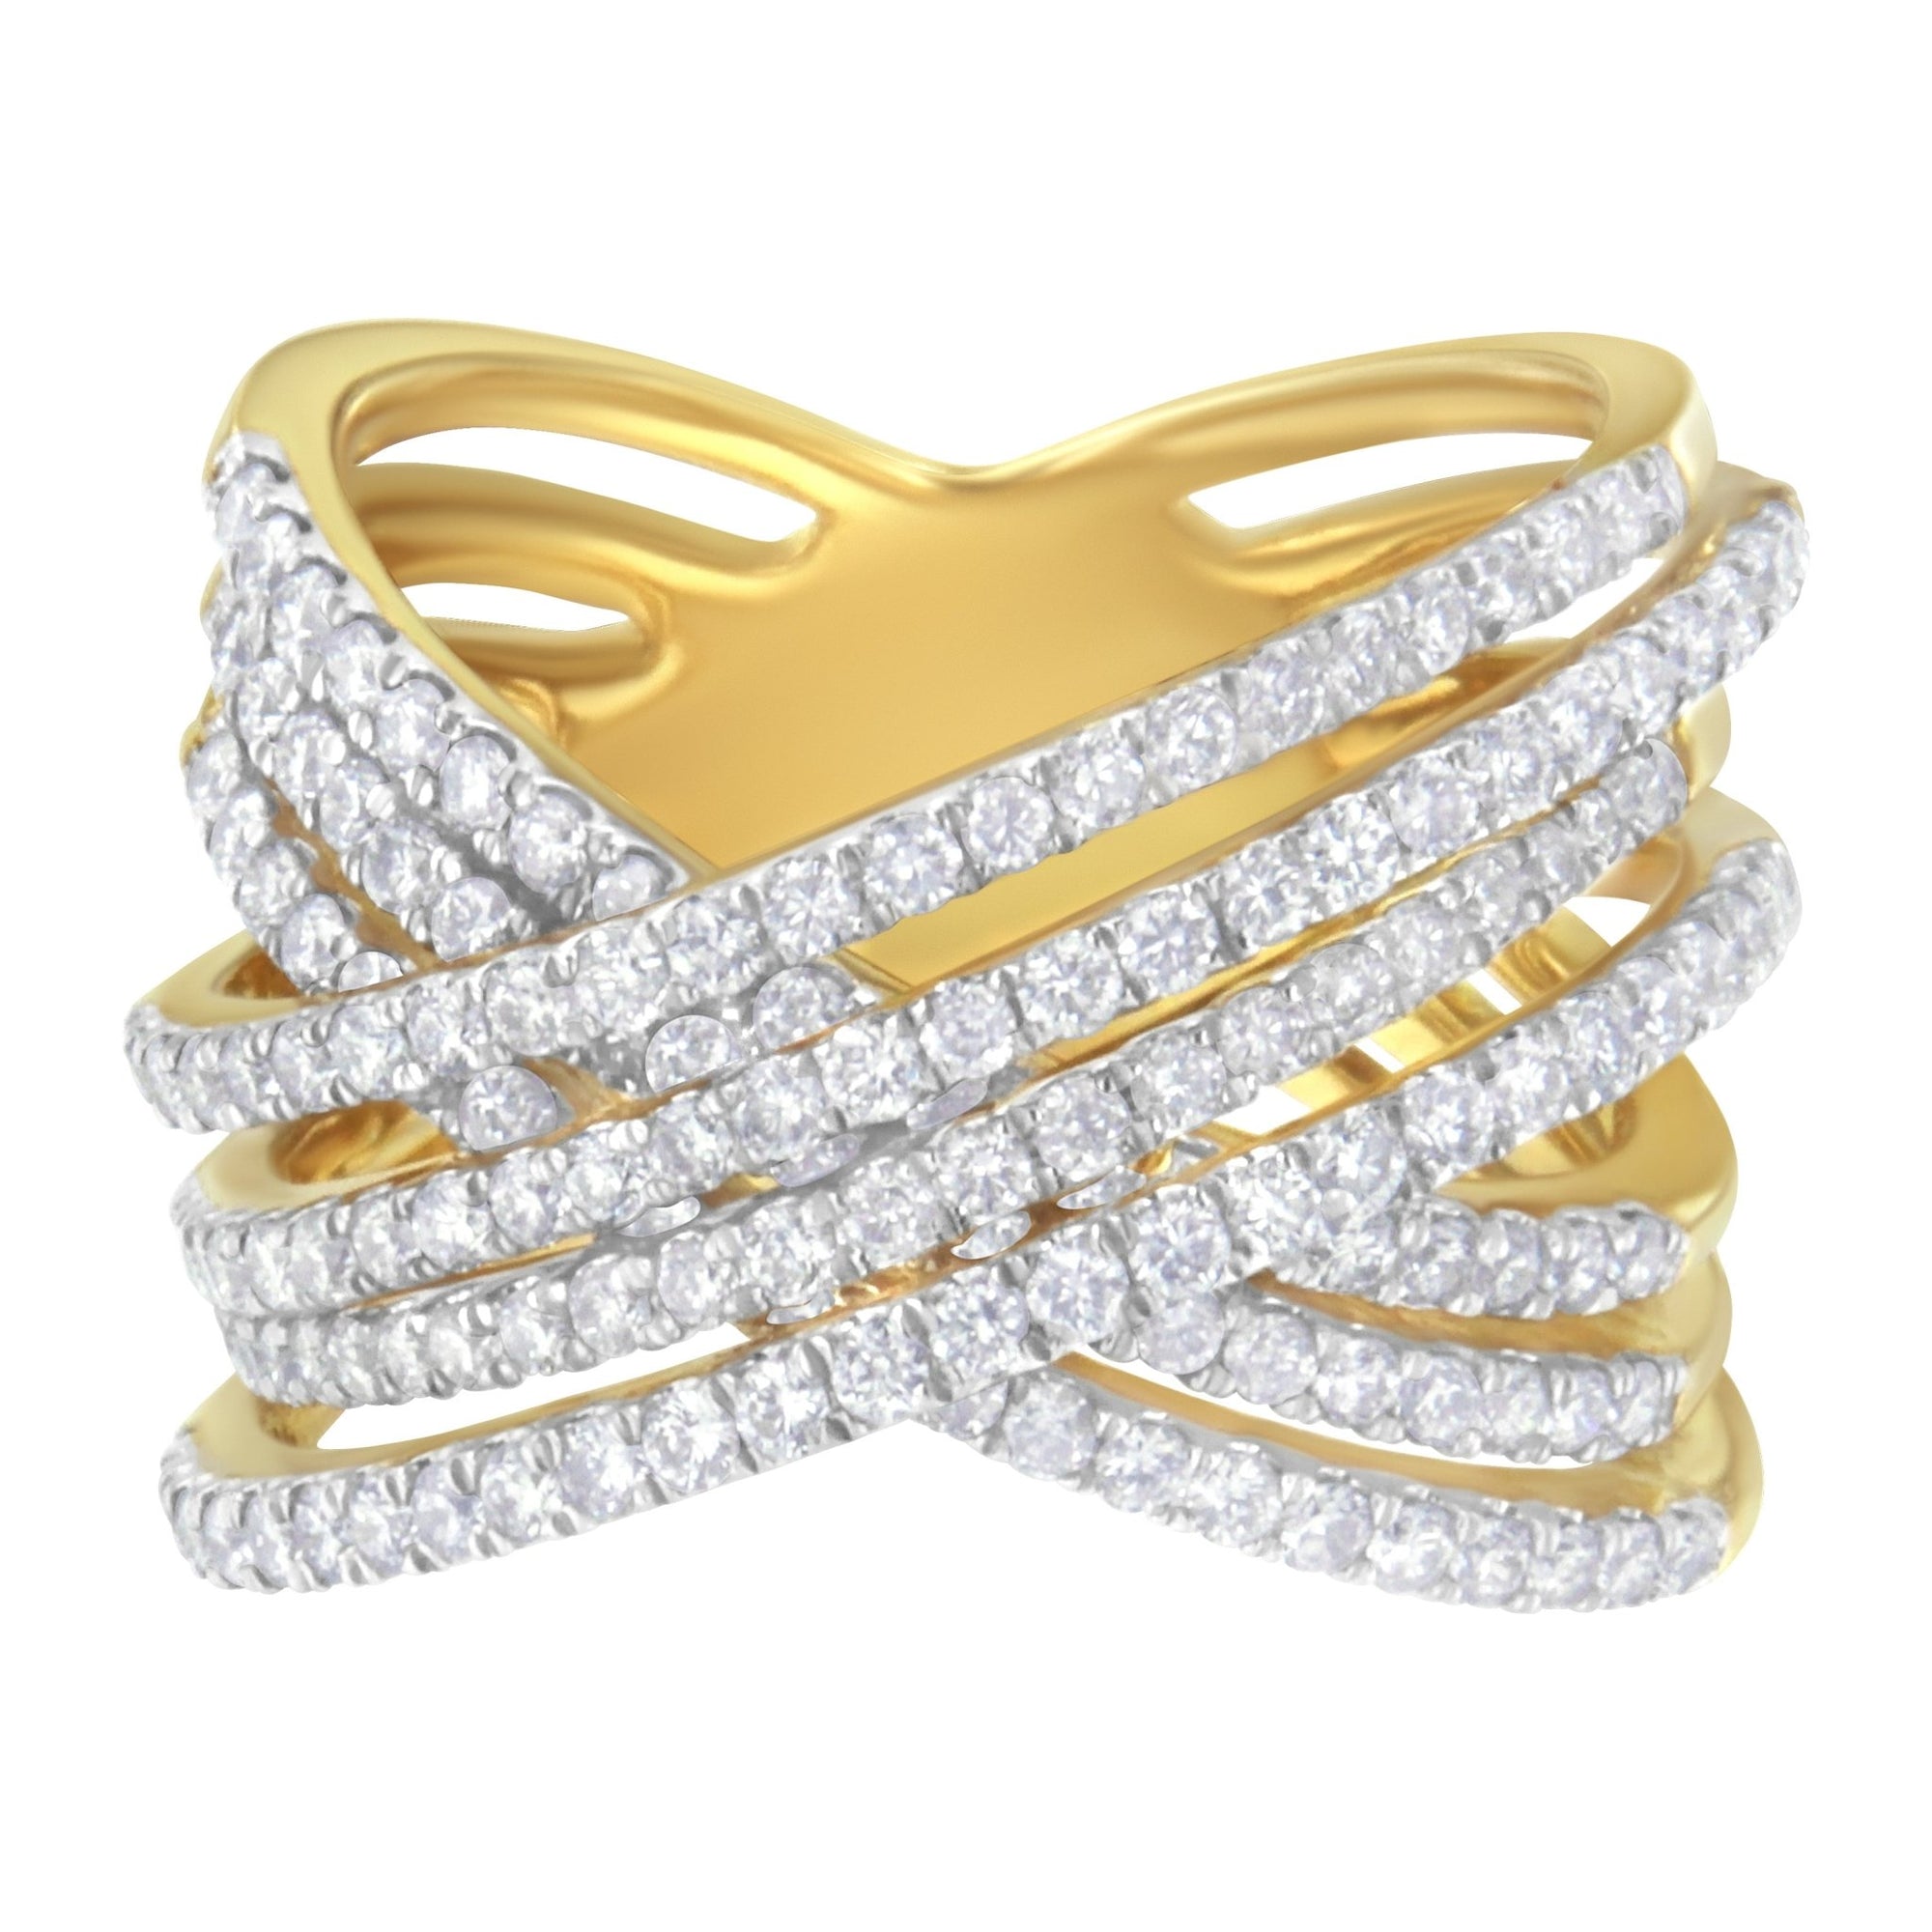 10KT Yellow Gold Diamond Bypass Ring (1 5/8 cttw, H-I Color, SI2-I1 Clarity) - LinkagejewelrydesignLinkagejewelrydesign